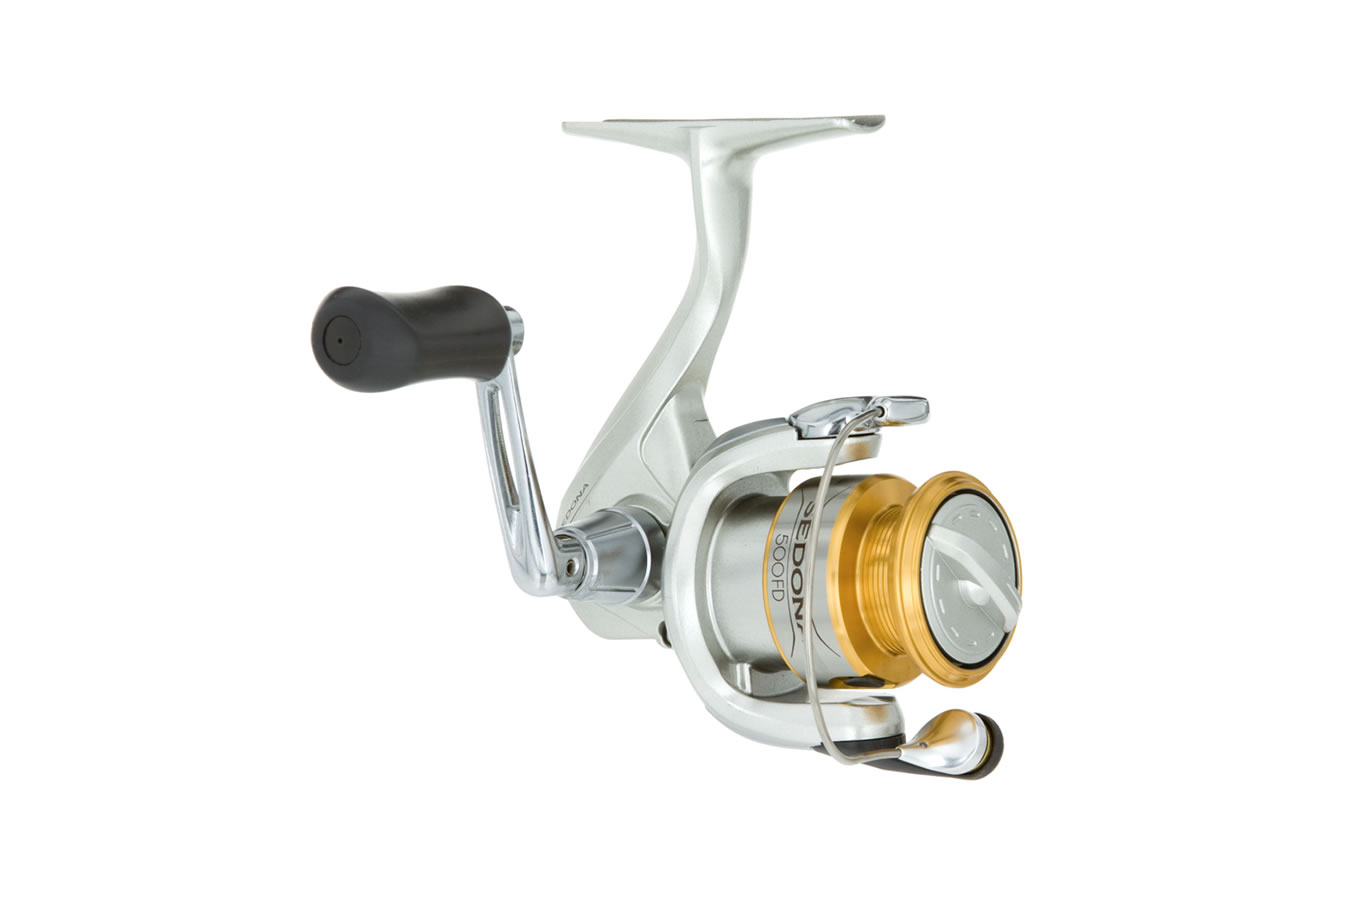 Discount Shimano Sedona 1000 FD - Spinning Reel (6.2:1) for Sale